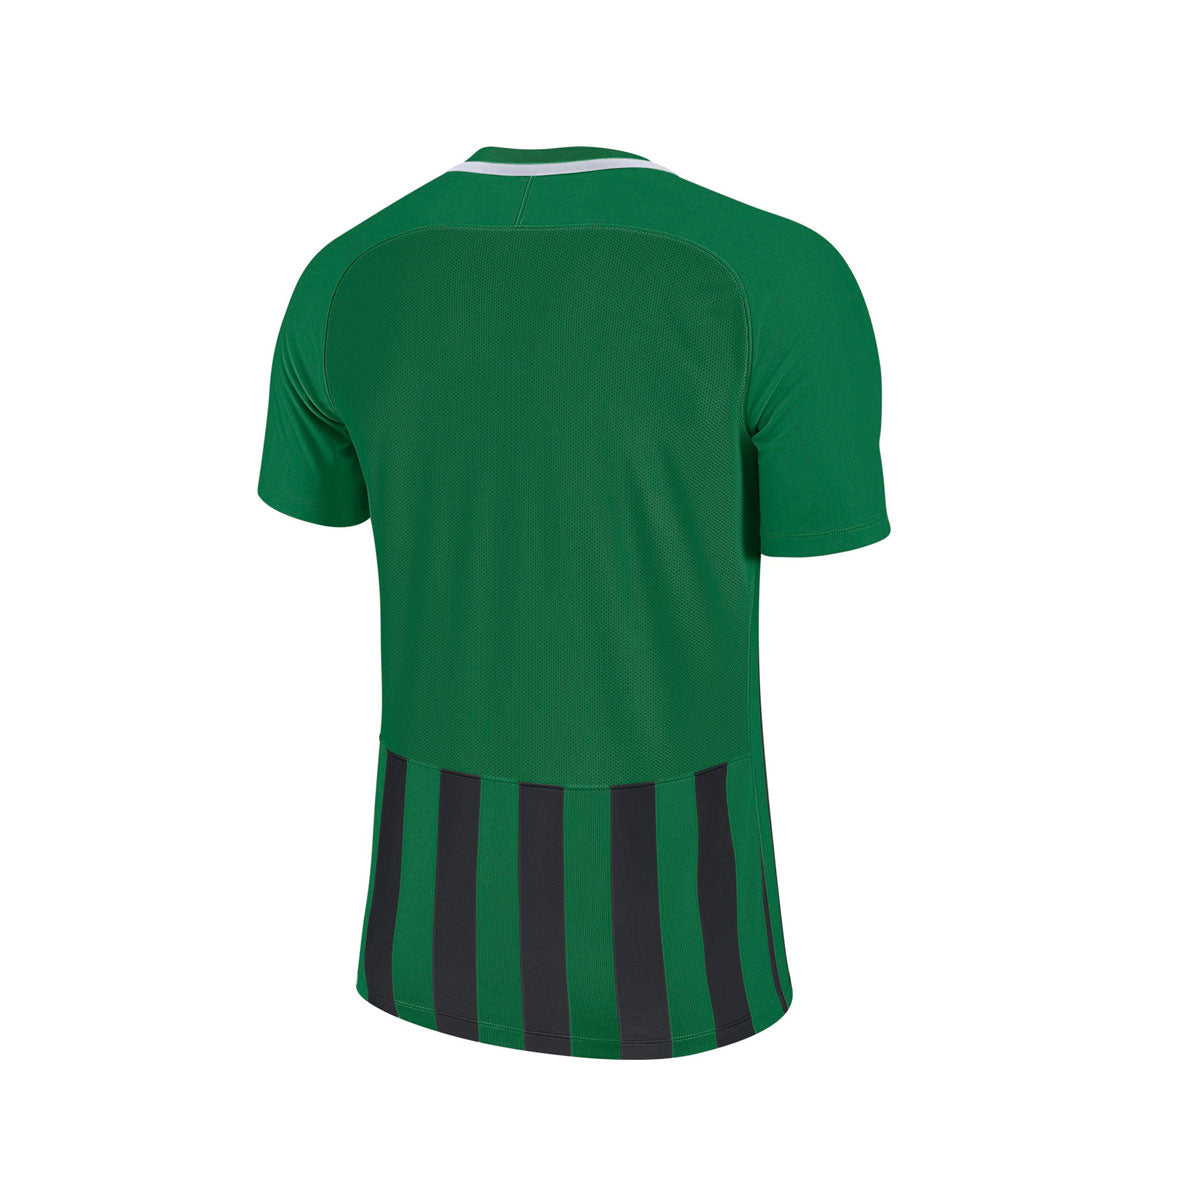 Nike Men's Division III Jersey Tee Soccer